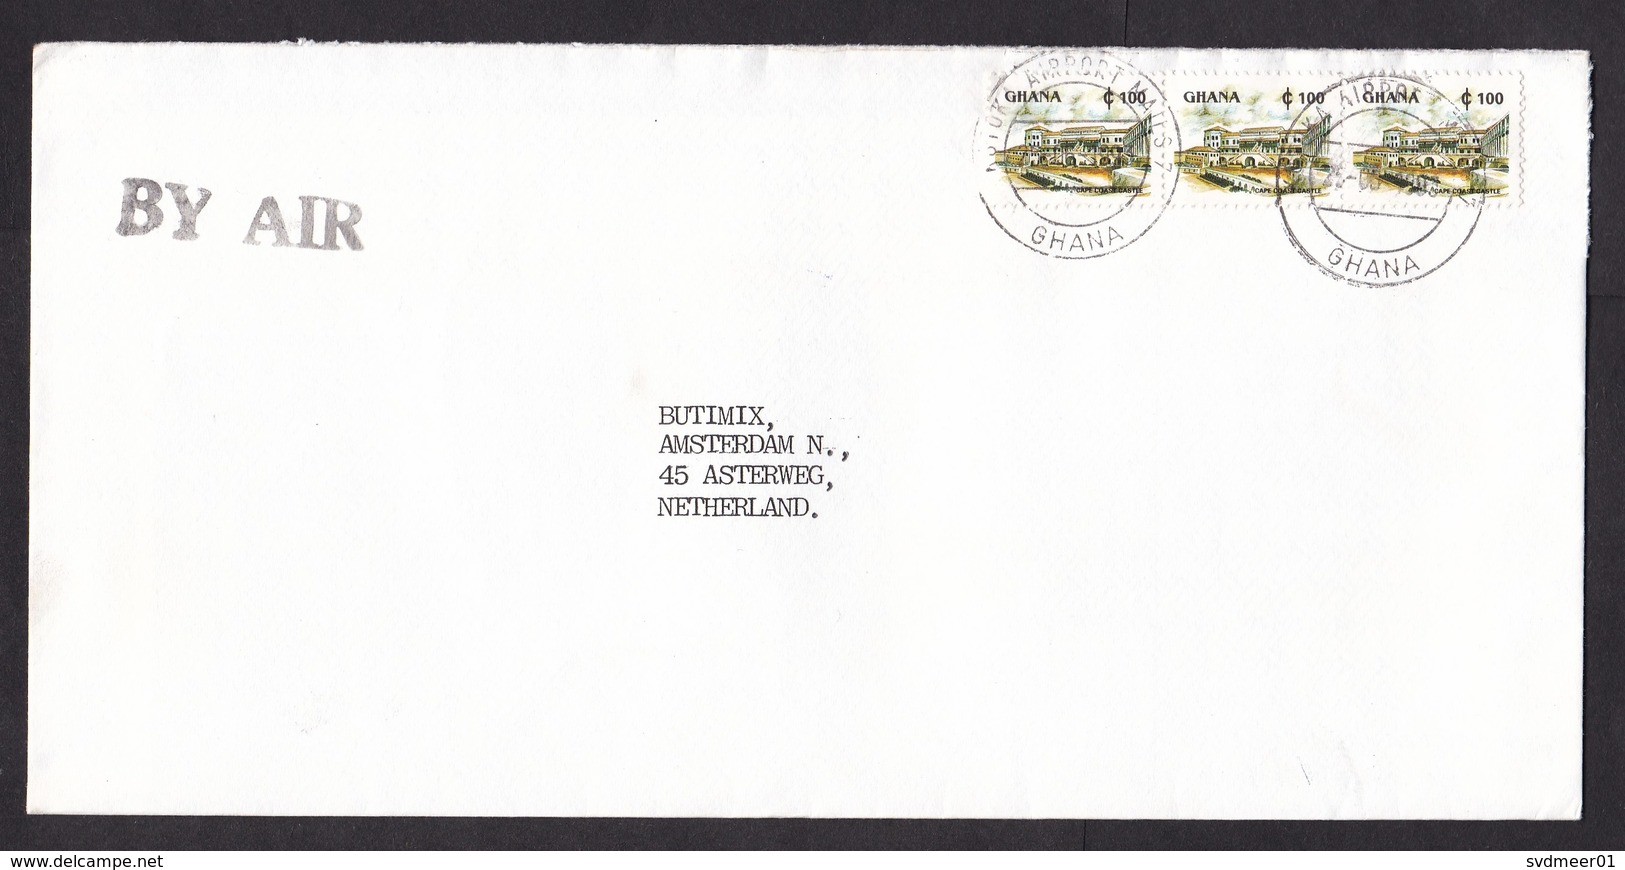 Ghana: Airmail Cover To Netherlands, 1993, 3 Stamps, Castle, Heritage, Cancel Airport (traces Of Use) - Ghana (1957-...)